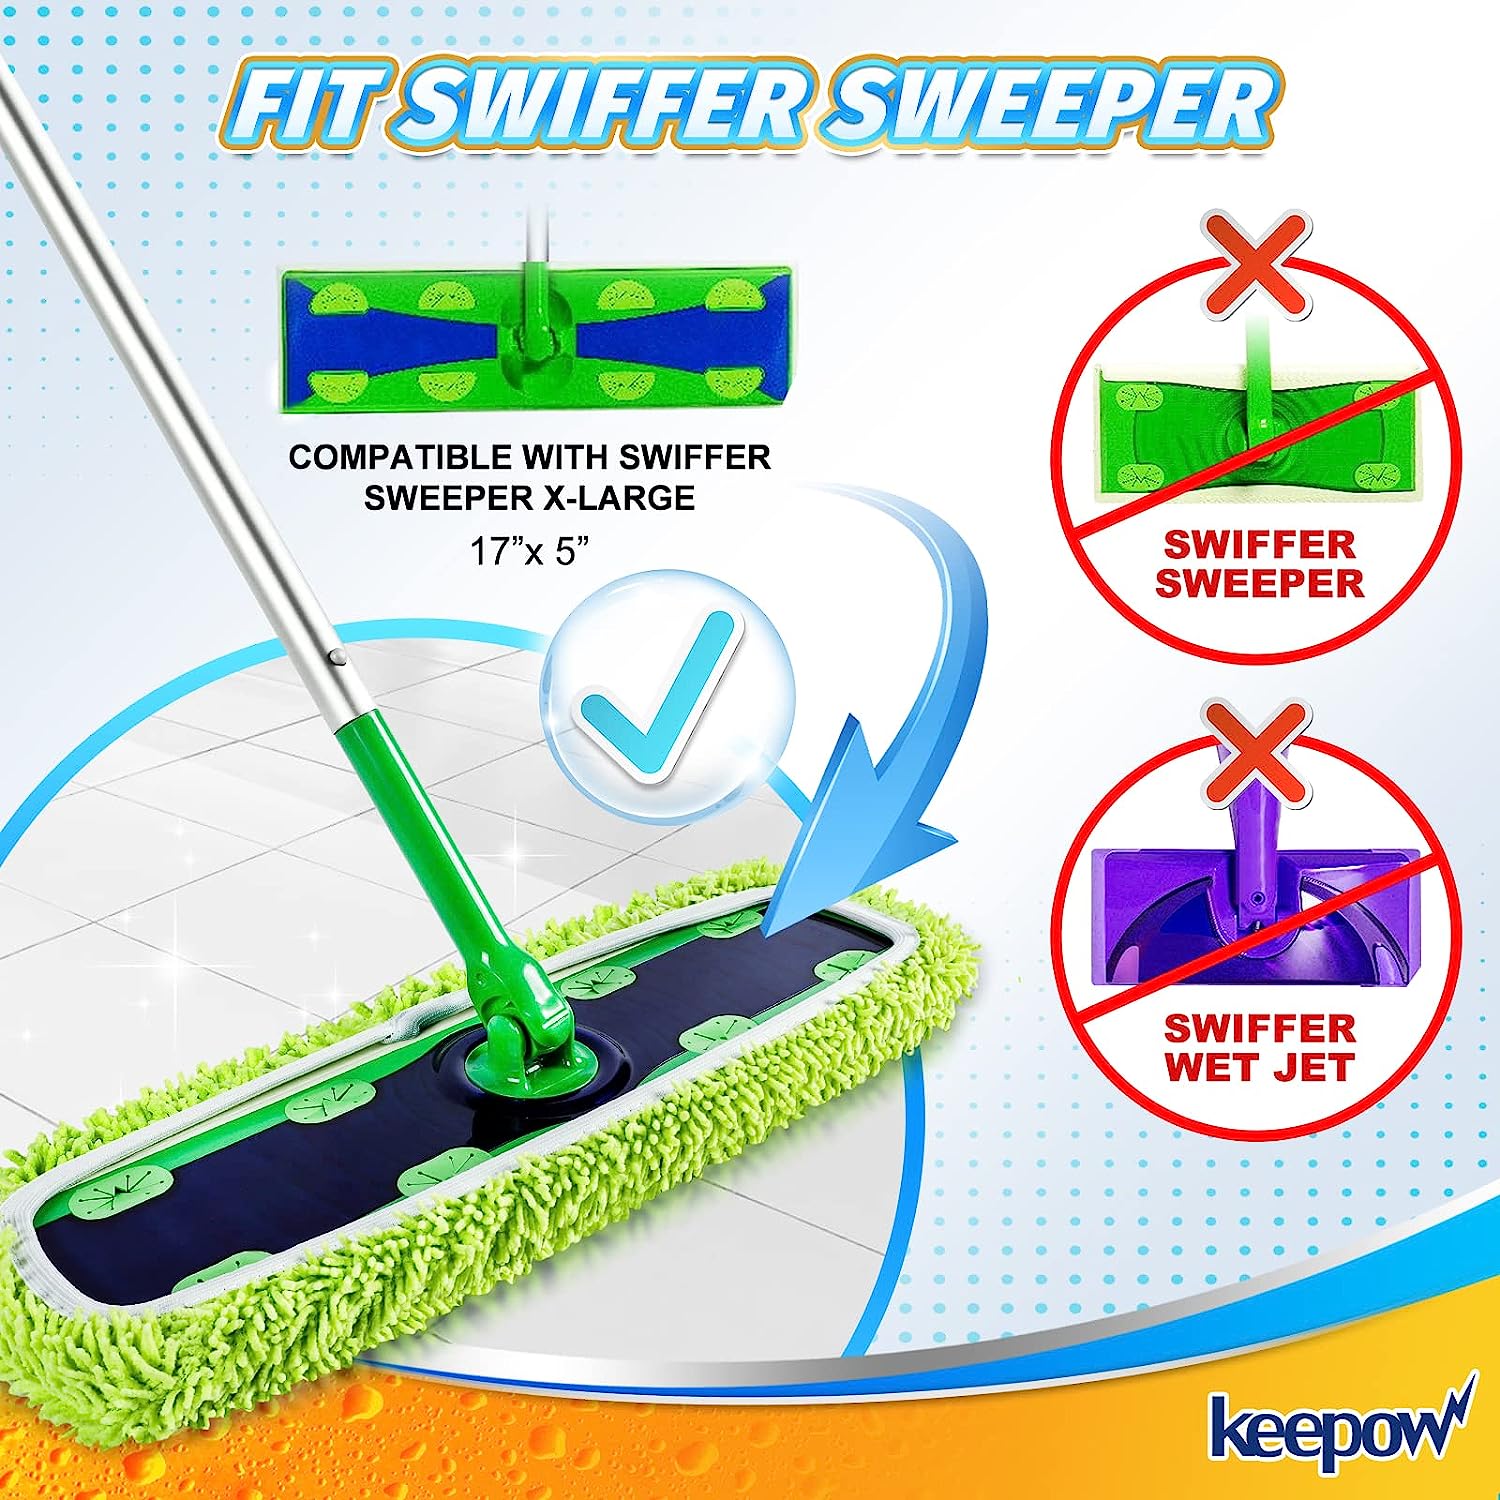 KEEPOW 5702M Reusable XL Wet Pads Refills for Swiffer XL Mop Sweeper, X-Large Dry-Sweeping/Wet-Mopping Microfiber Cloths, 2 Pack